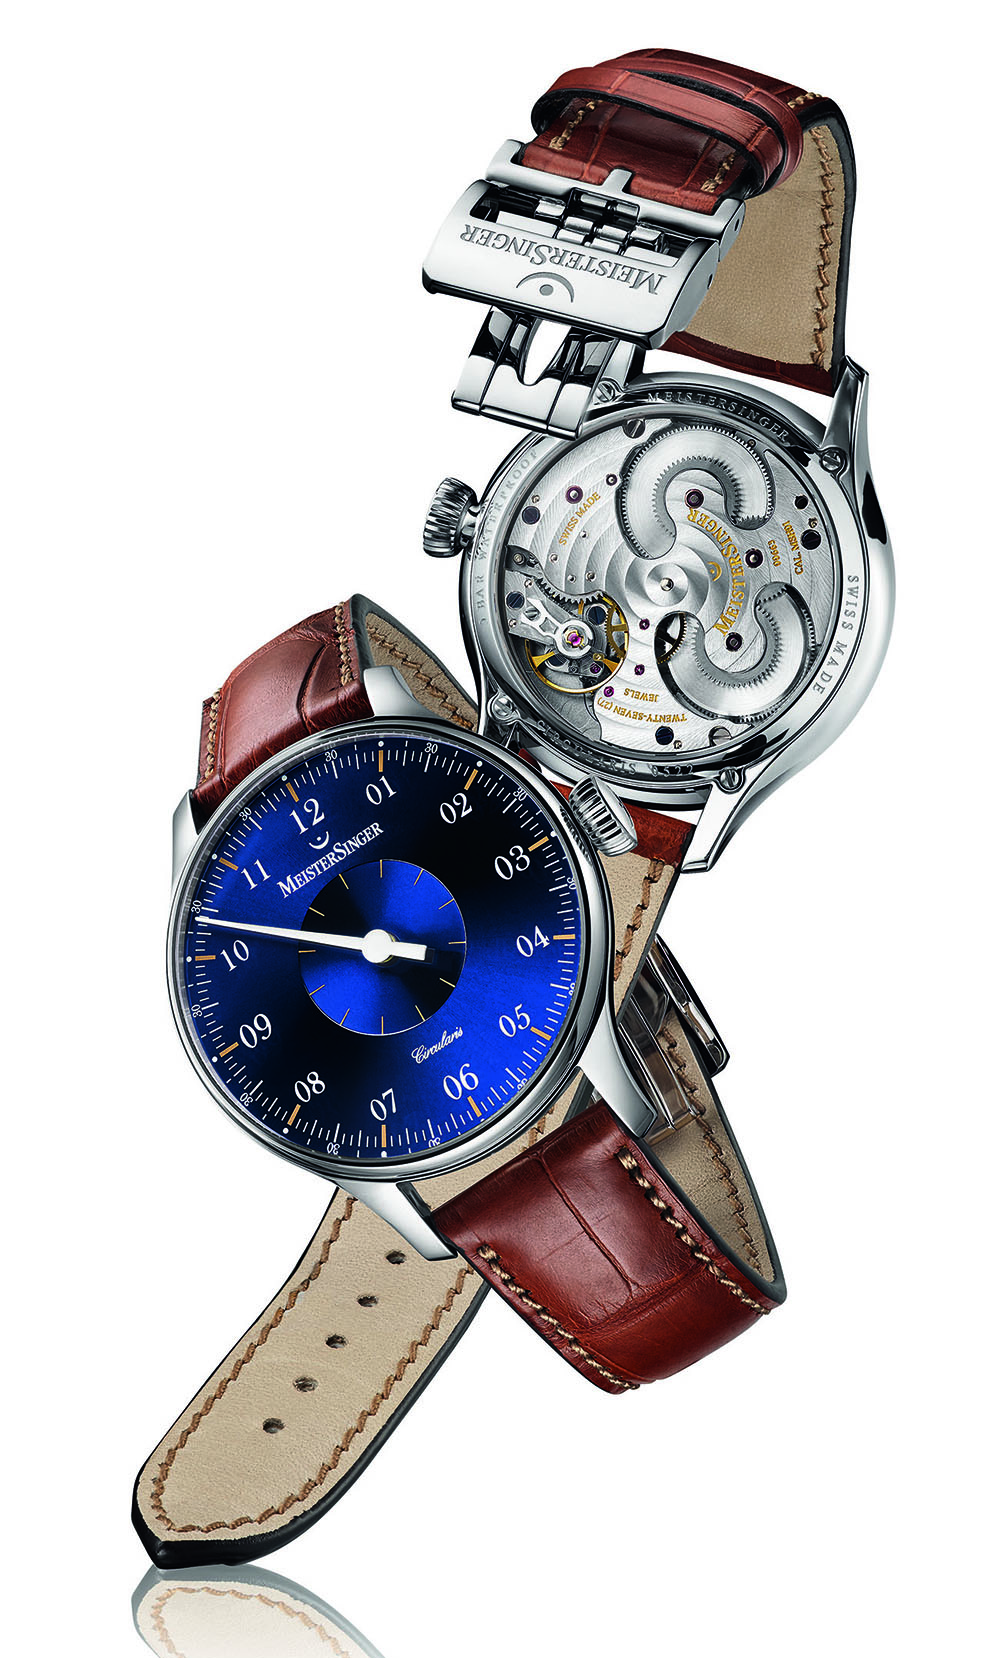 REFERENCE: CC108 MOVEMENT: In-house Caliber MSH01, hand-wound, two barrels, diameter = 32.7 mm, height = 5.4 mm, 28,800 vph, 27 jewels, five-day power reserve CASE: Stainless steel, diameter = 43 mm, height = 12.5 mm, curved sapphire crystal with non-reflective coating on the inside, sapphire caseback secured with four screws, water-resistant to 50 meters STRAP AND CLASP: Alligator strap with stainless-steel double folding clasp VARIATIONS: Ivory or silver-coloured dial